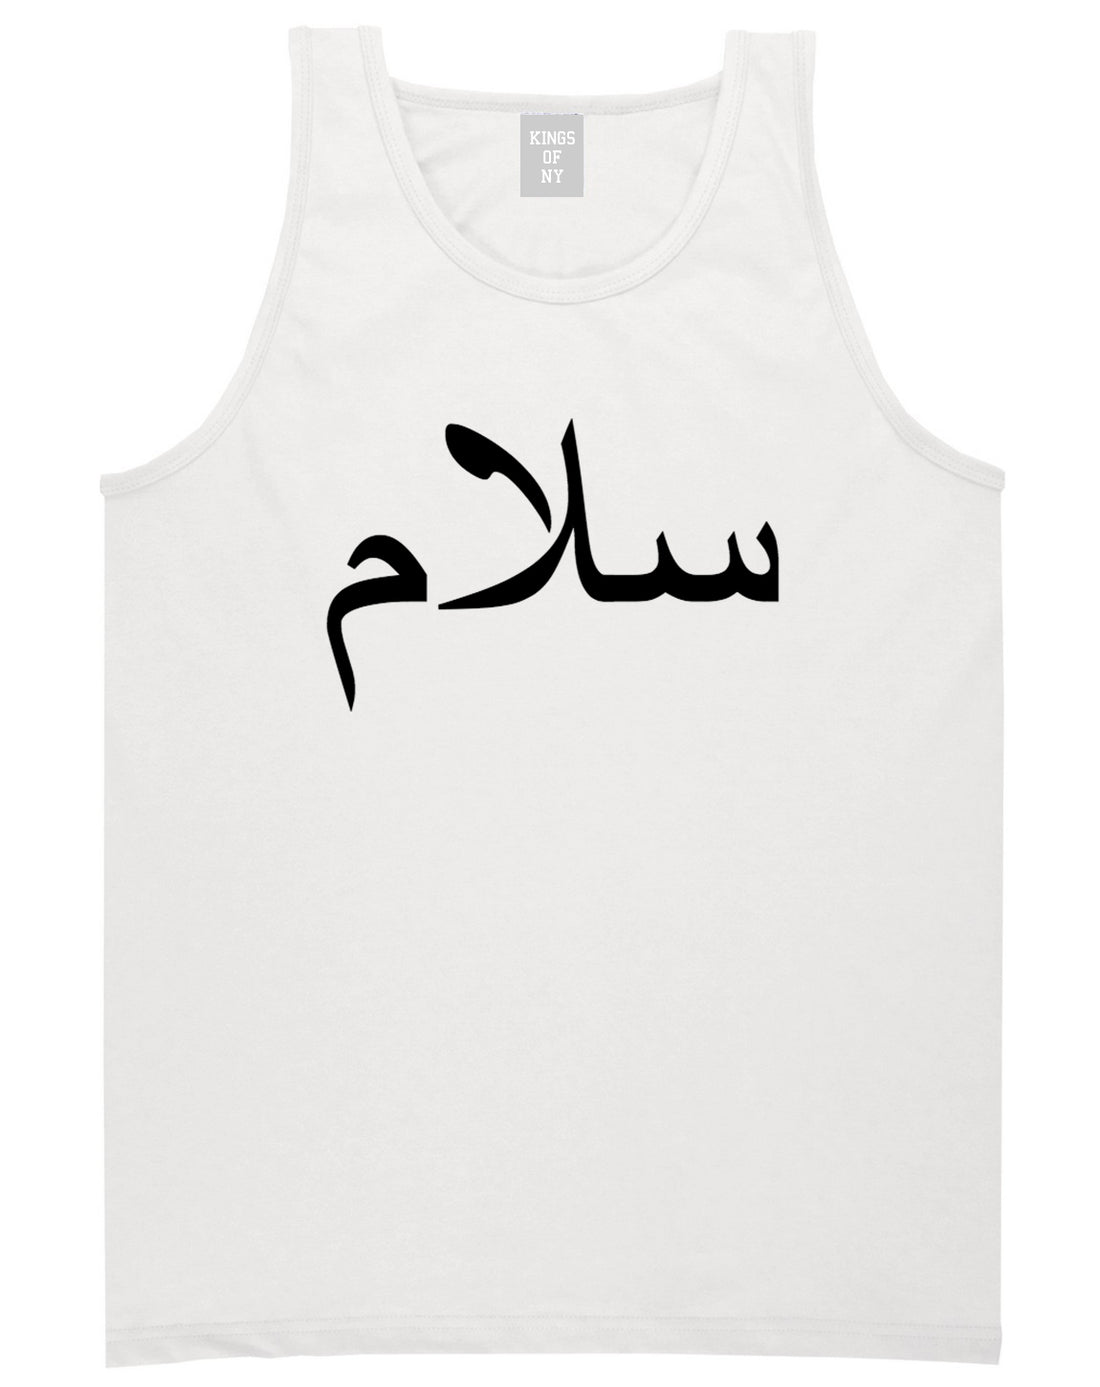 Arabic Peace Salam White Tank Top Shirt by Kings Of NY